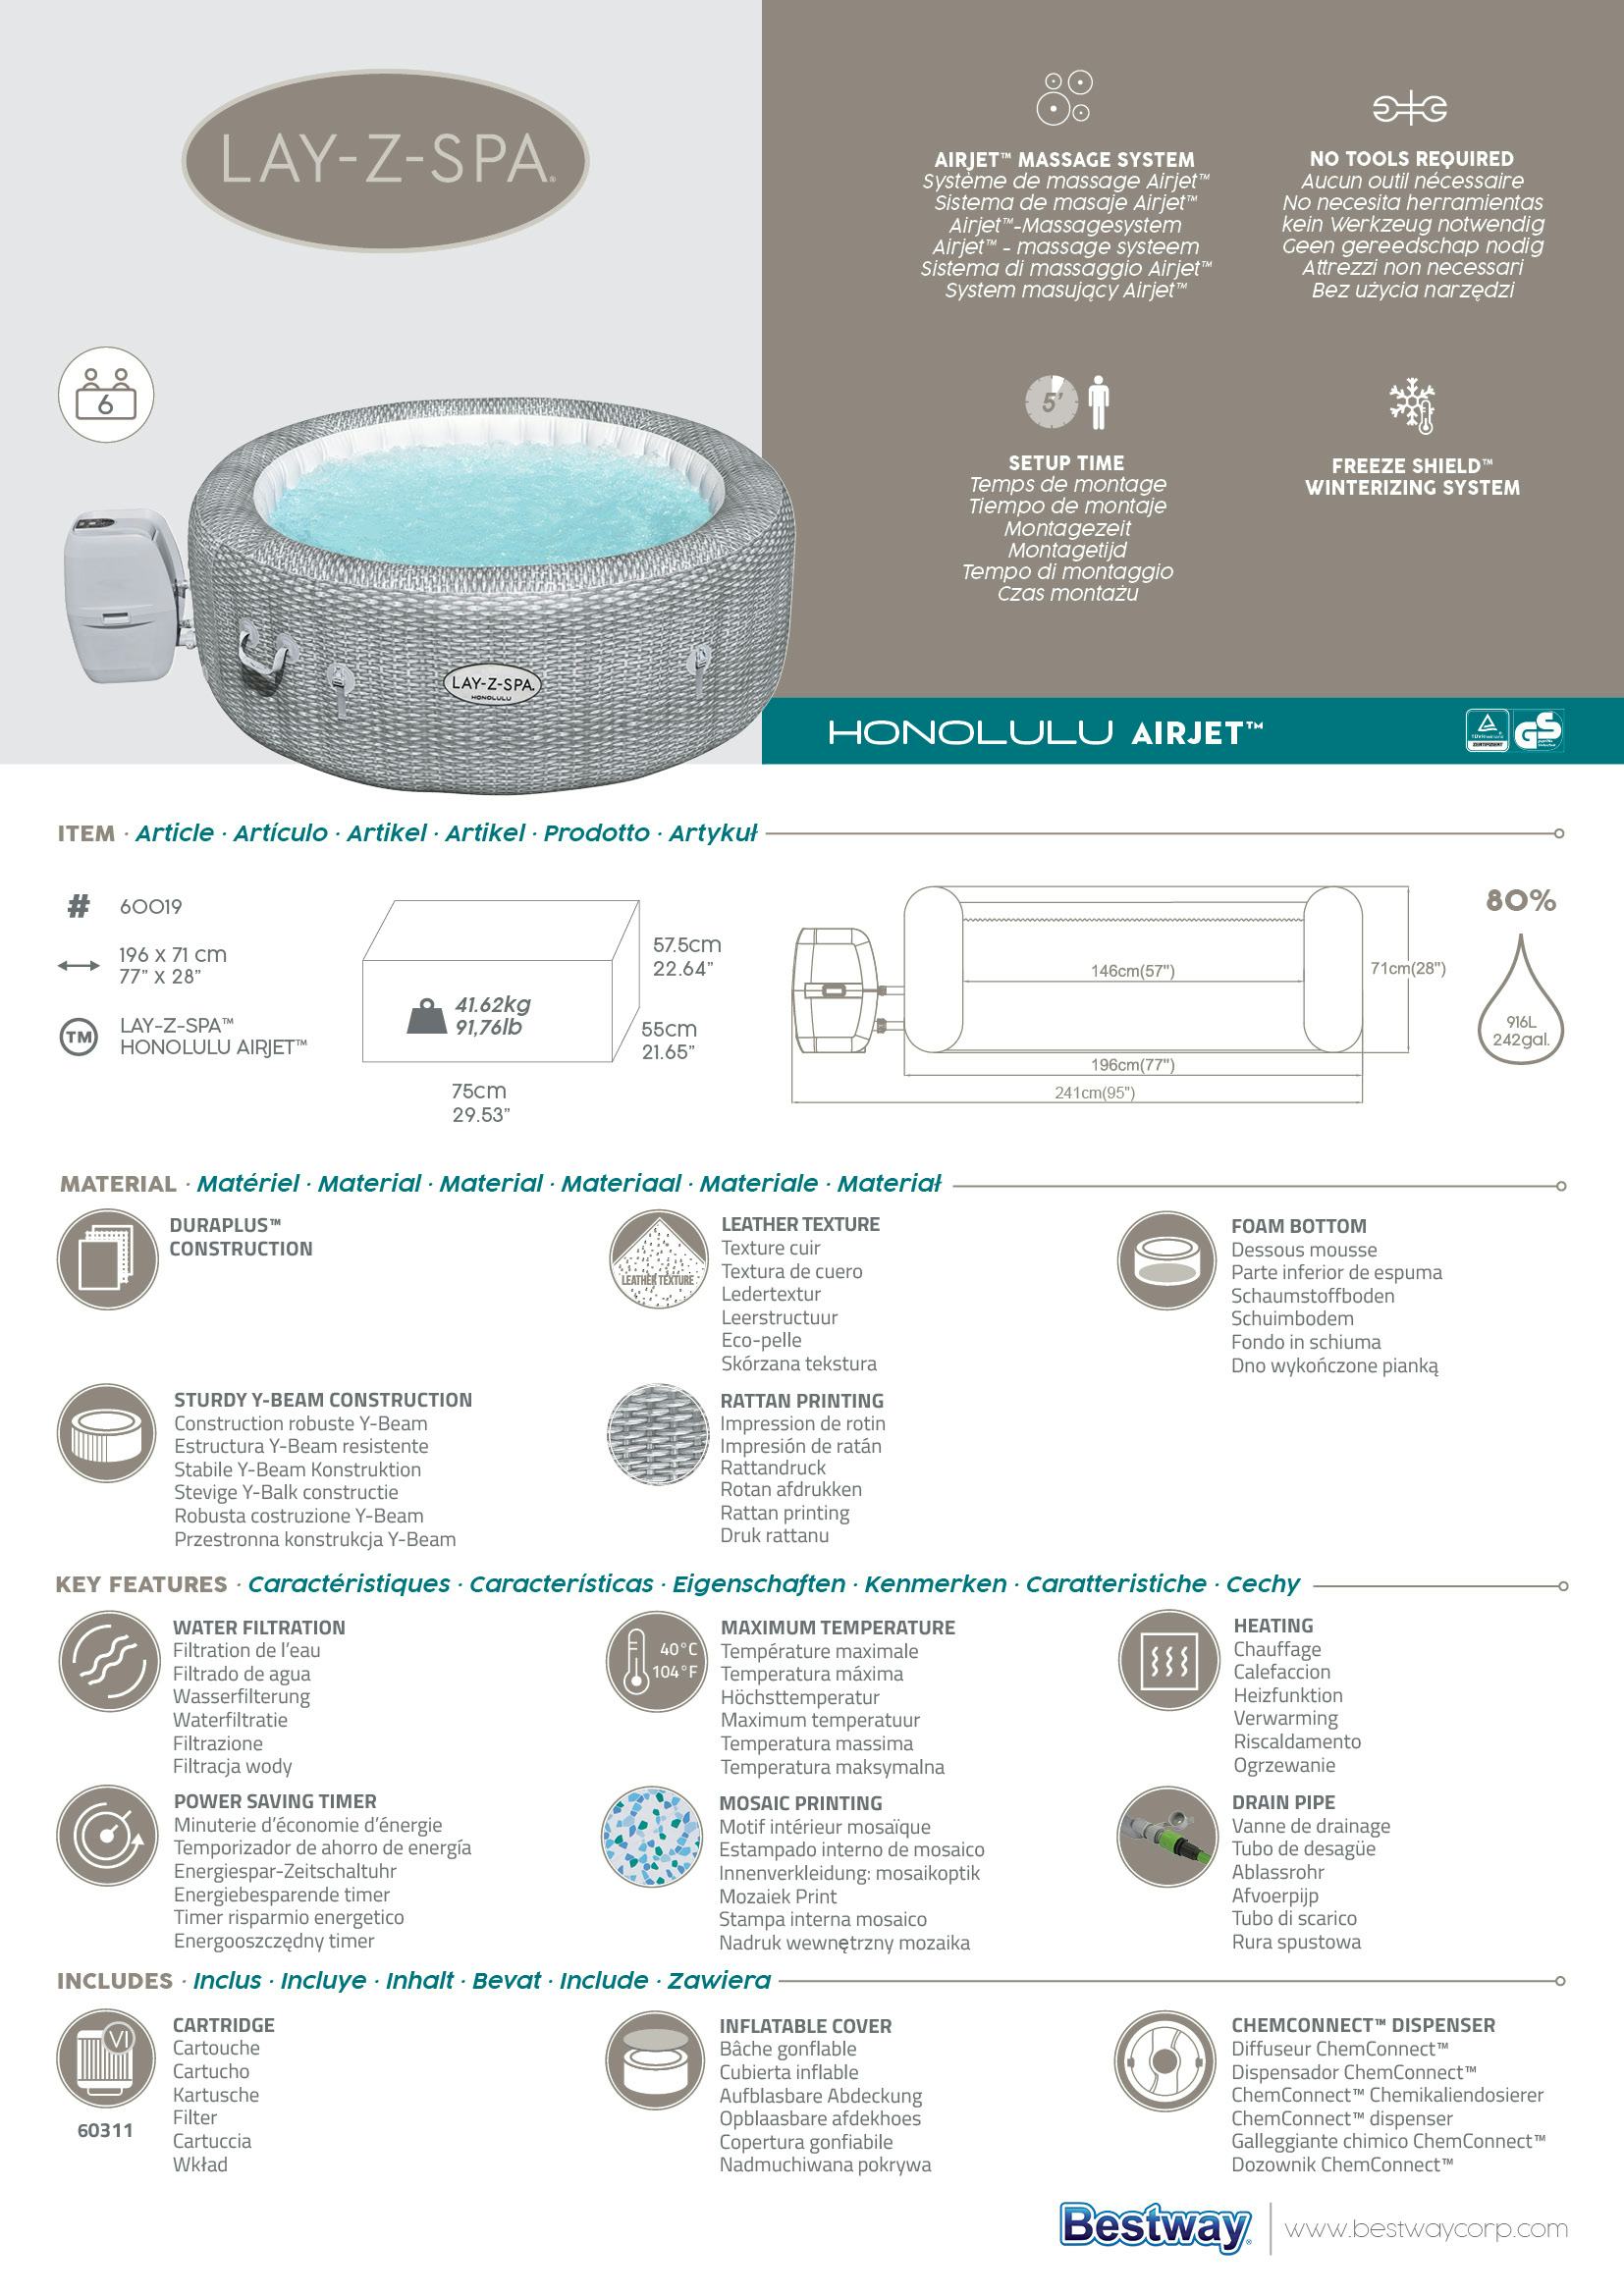 Spas Gonflables Spa gonflable rond Lay-Z-Spa® Honolulu Airjet™ 4 - 6 personnes Bestway 11